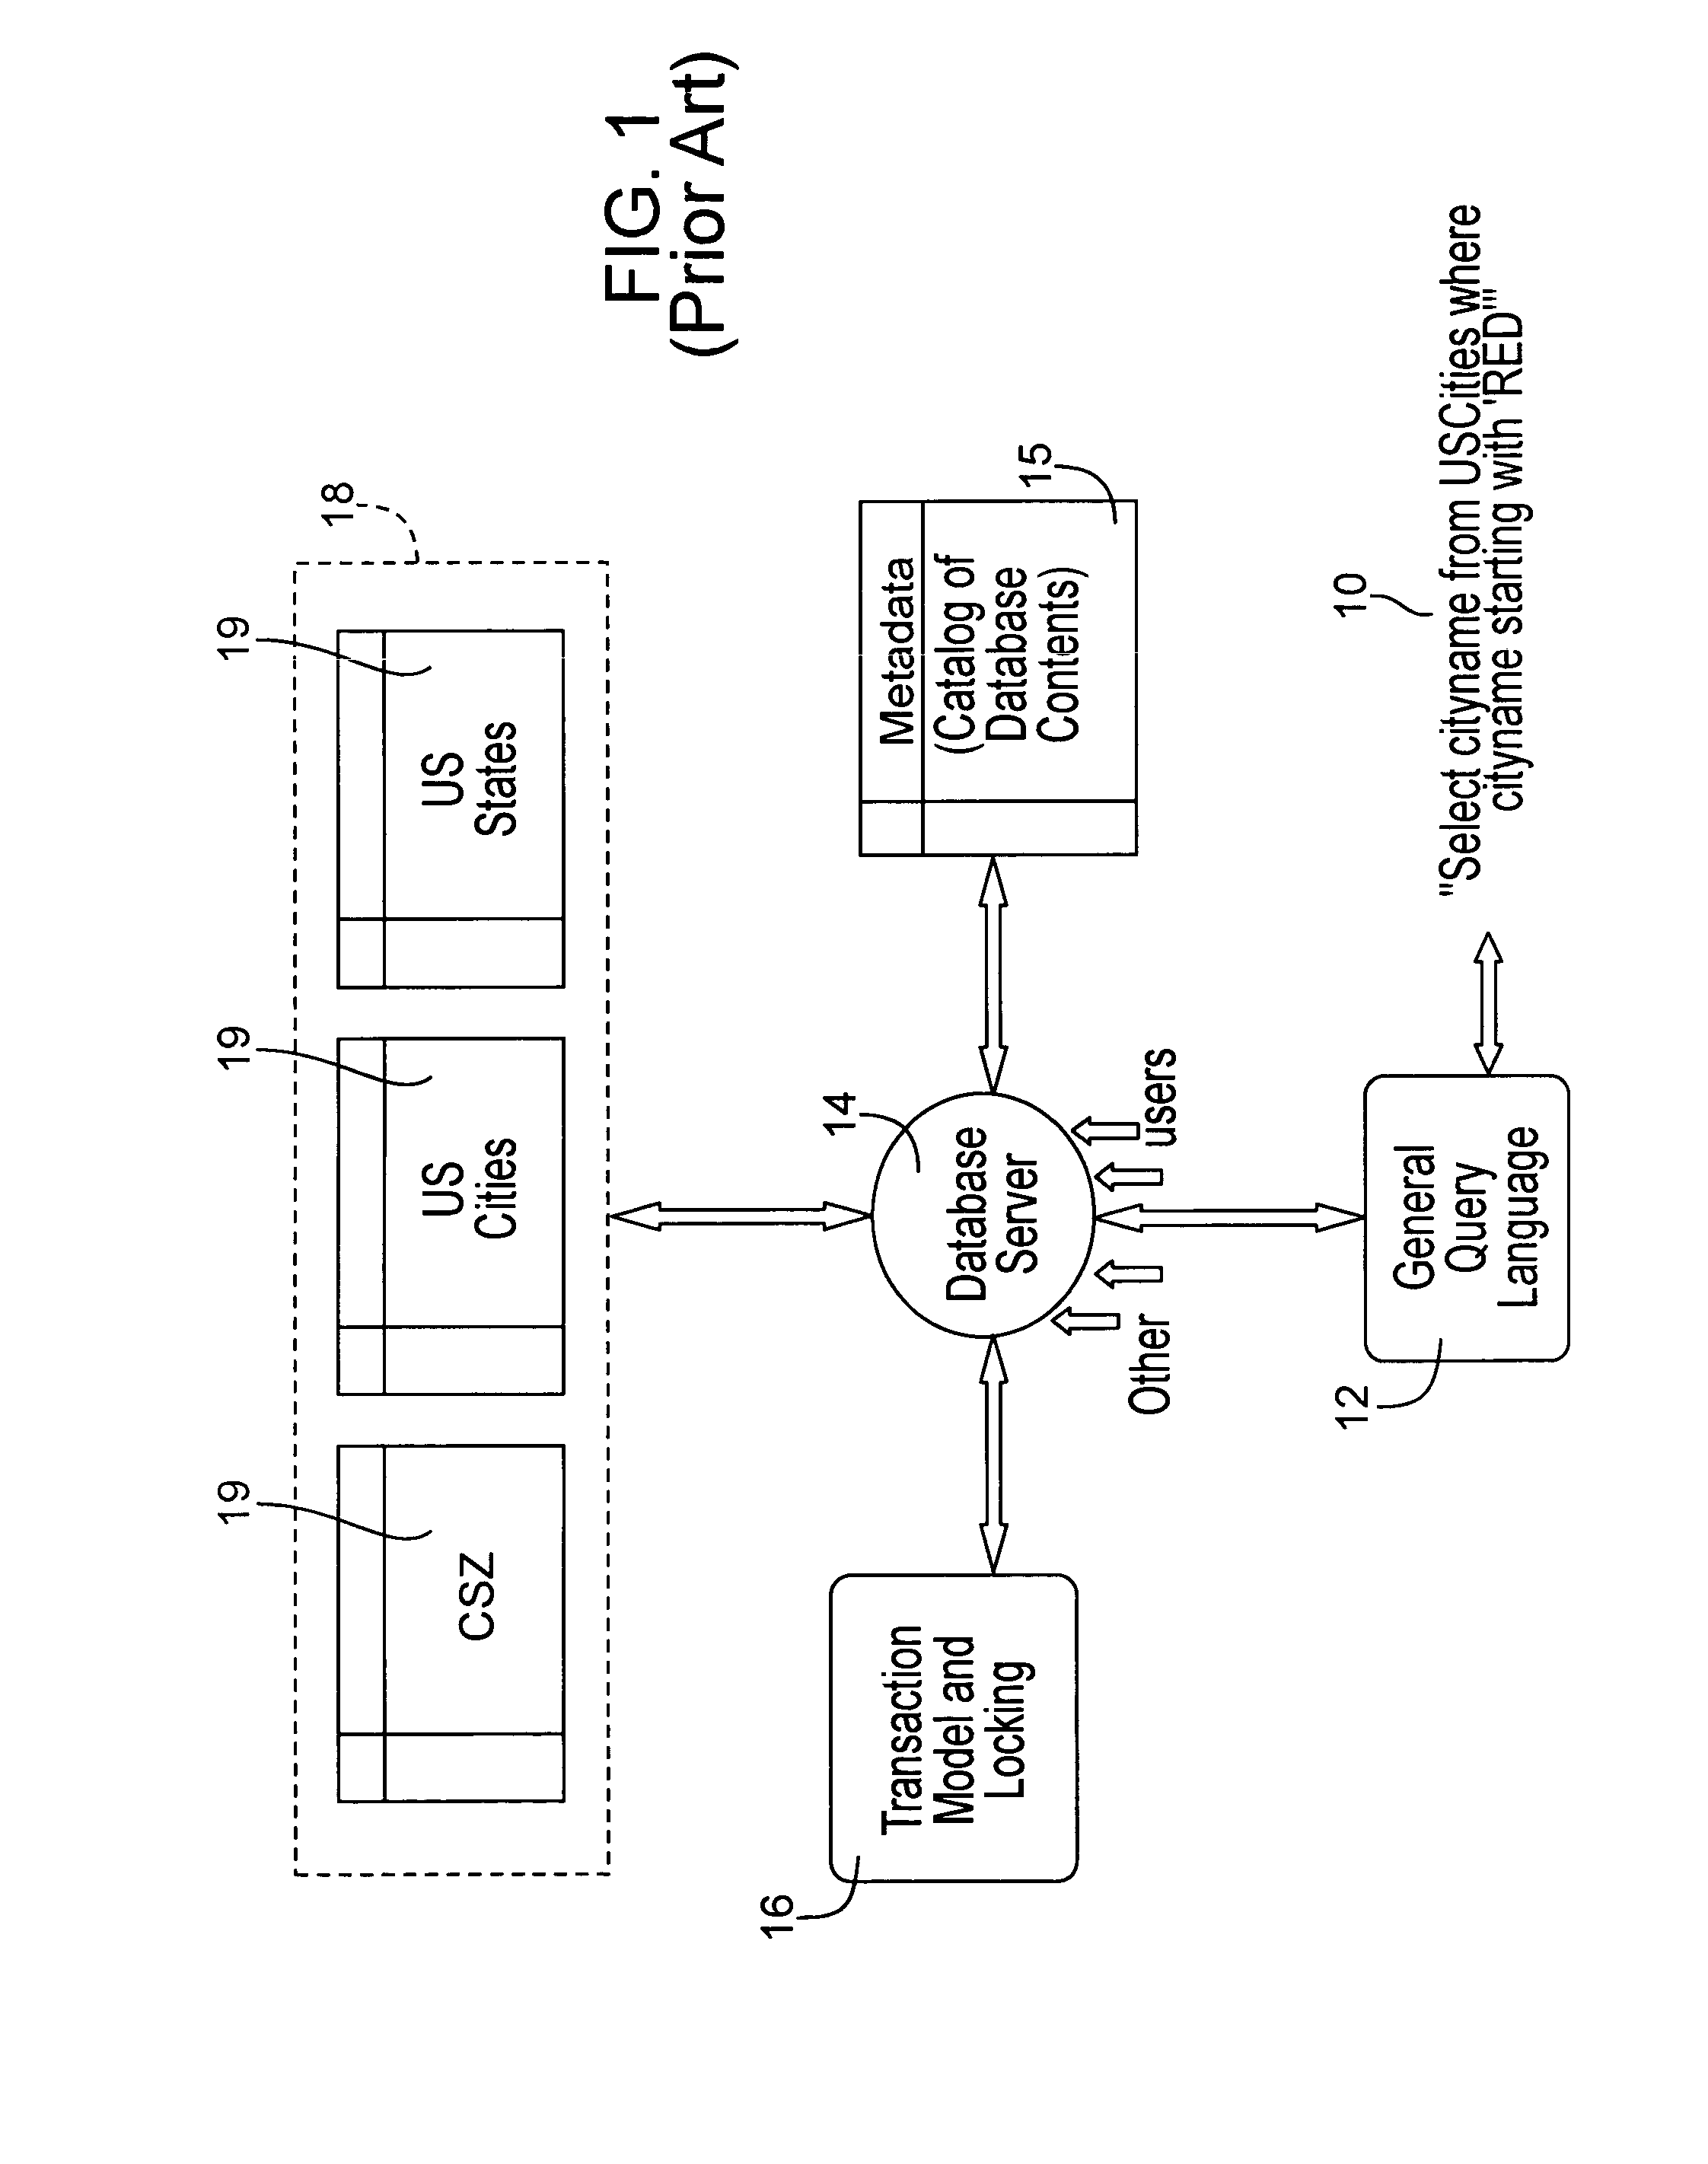 Controlled-access database system and method